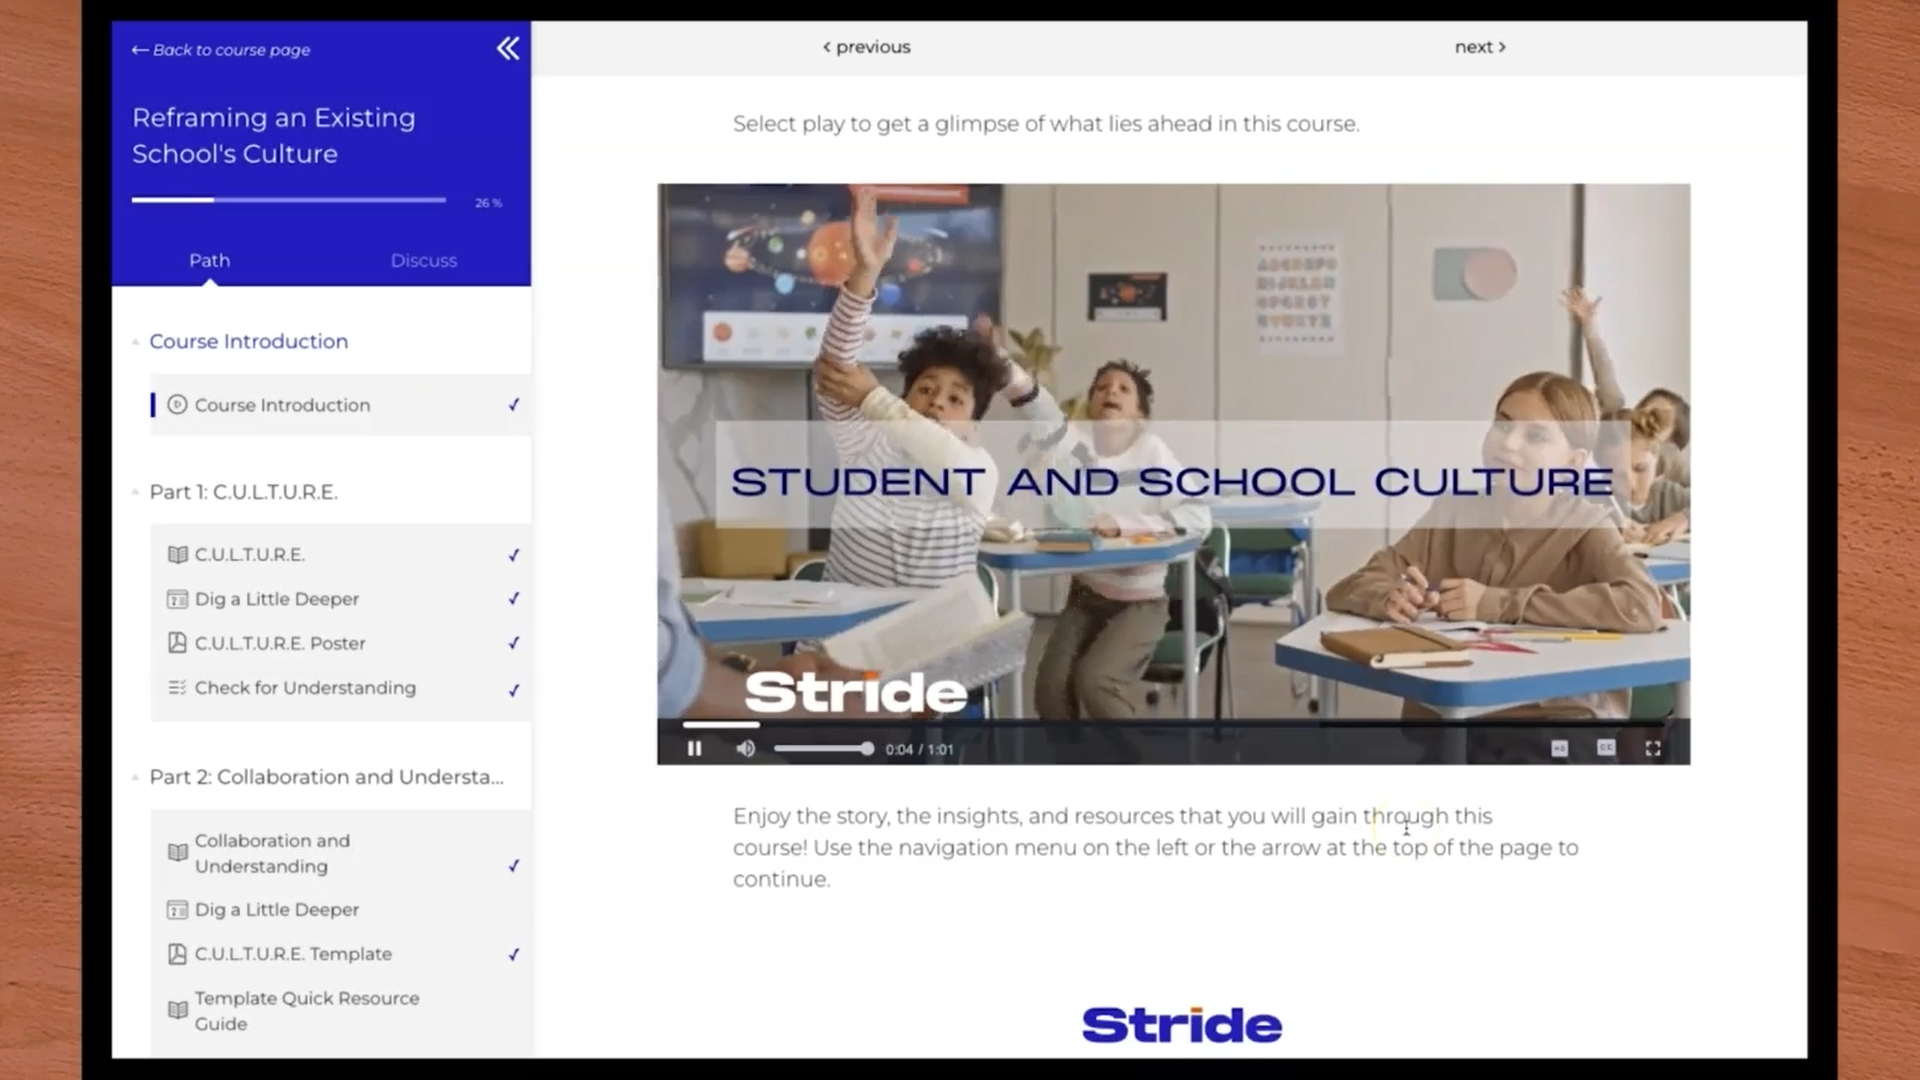 Stride Professional Development Center: Take Charge of Your Learning.